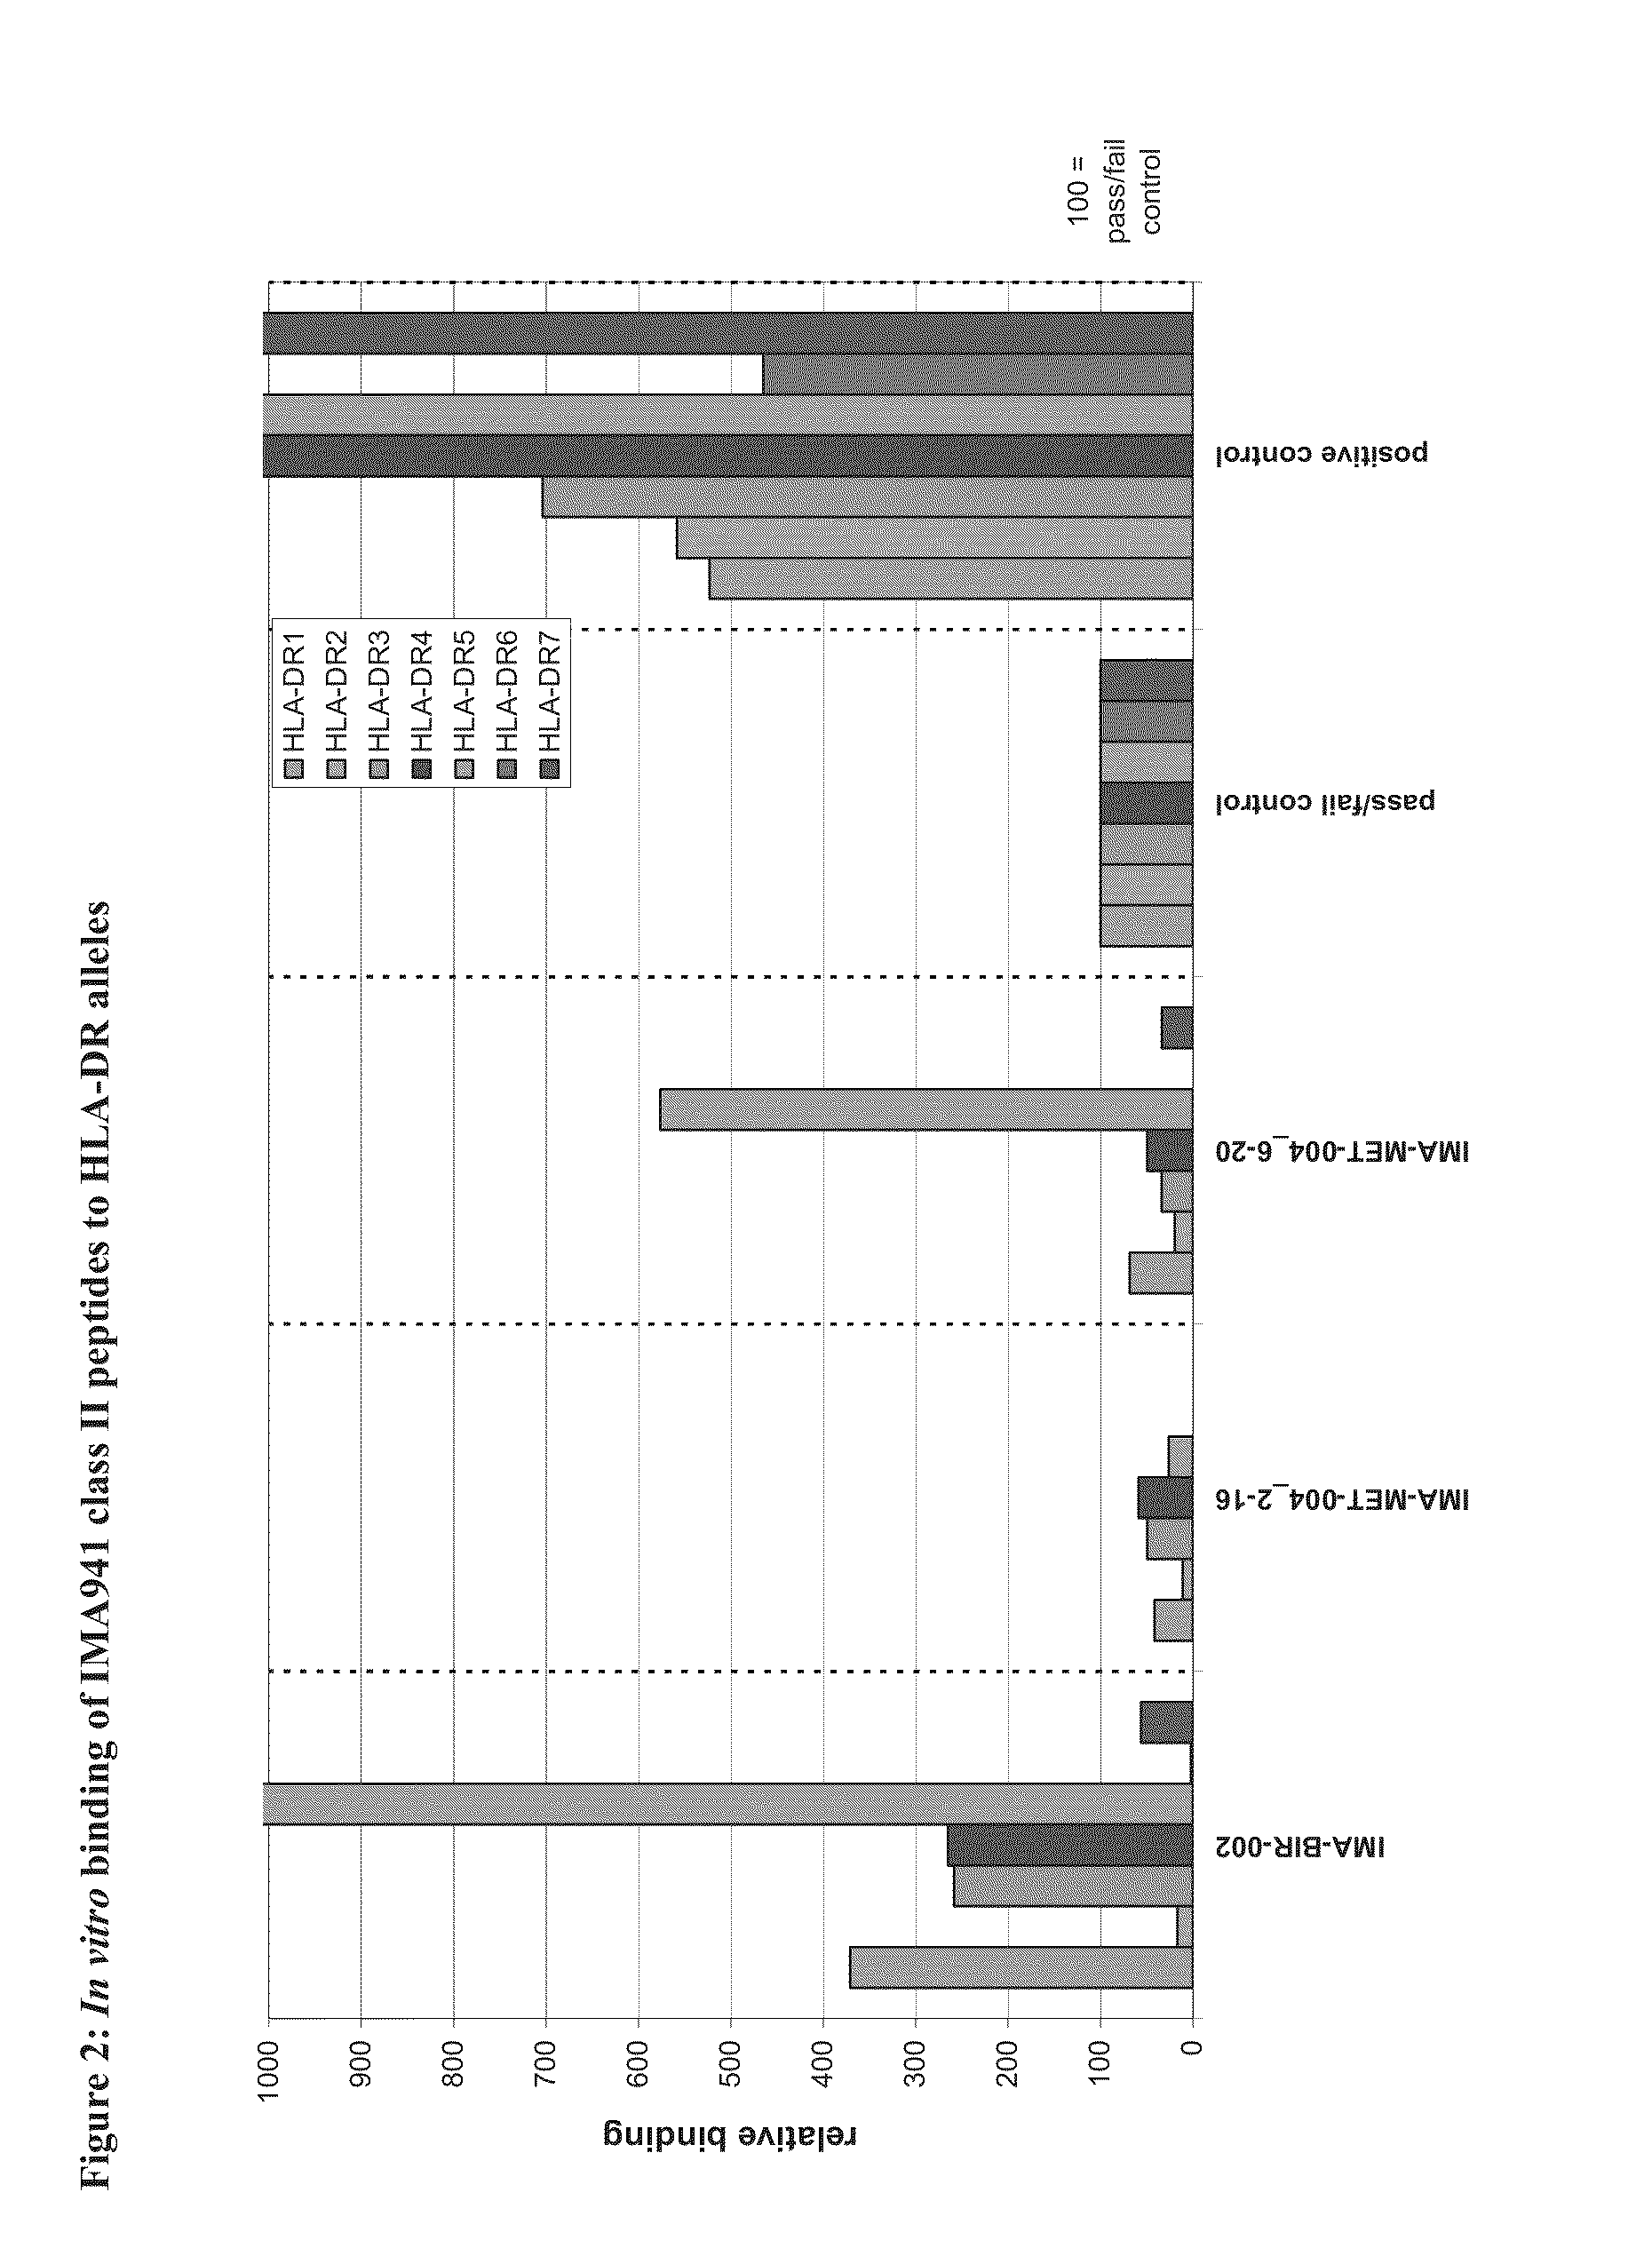 Composition of tumor-associated peptides and related Anti-cancer vaccine for the treatment of gastric cancer and other cancers